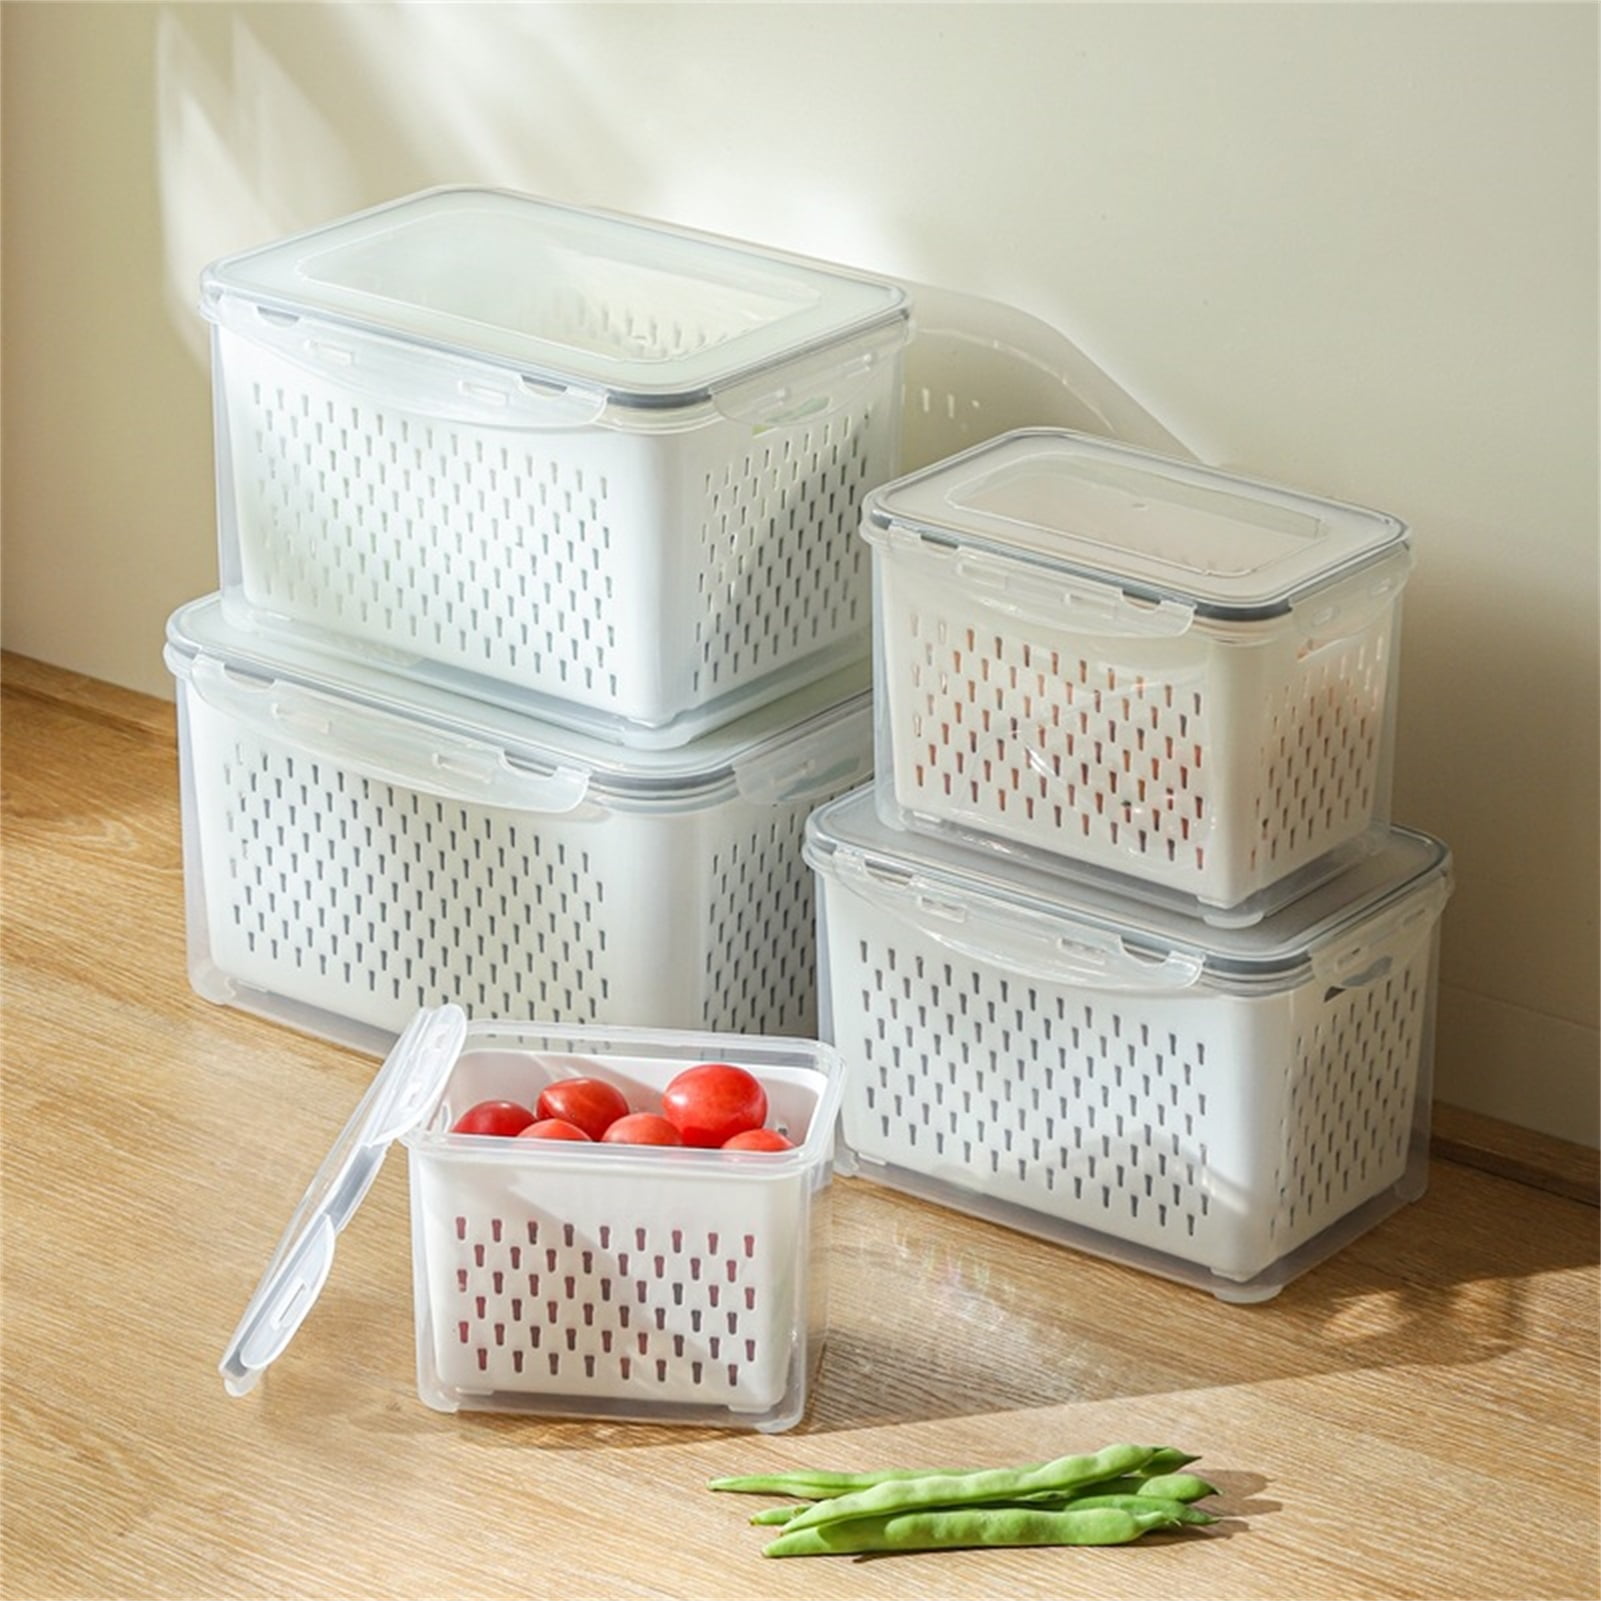 Tupperware Store It All Plastic Container, 12 Litres, White, Beige